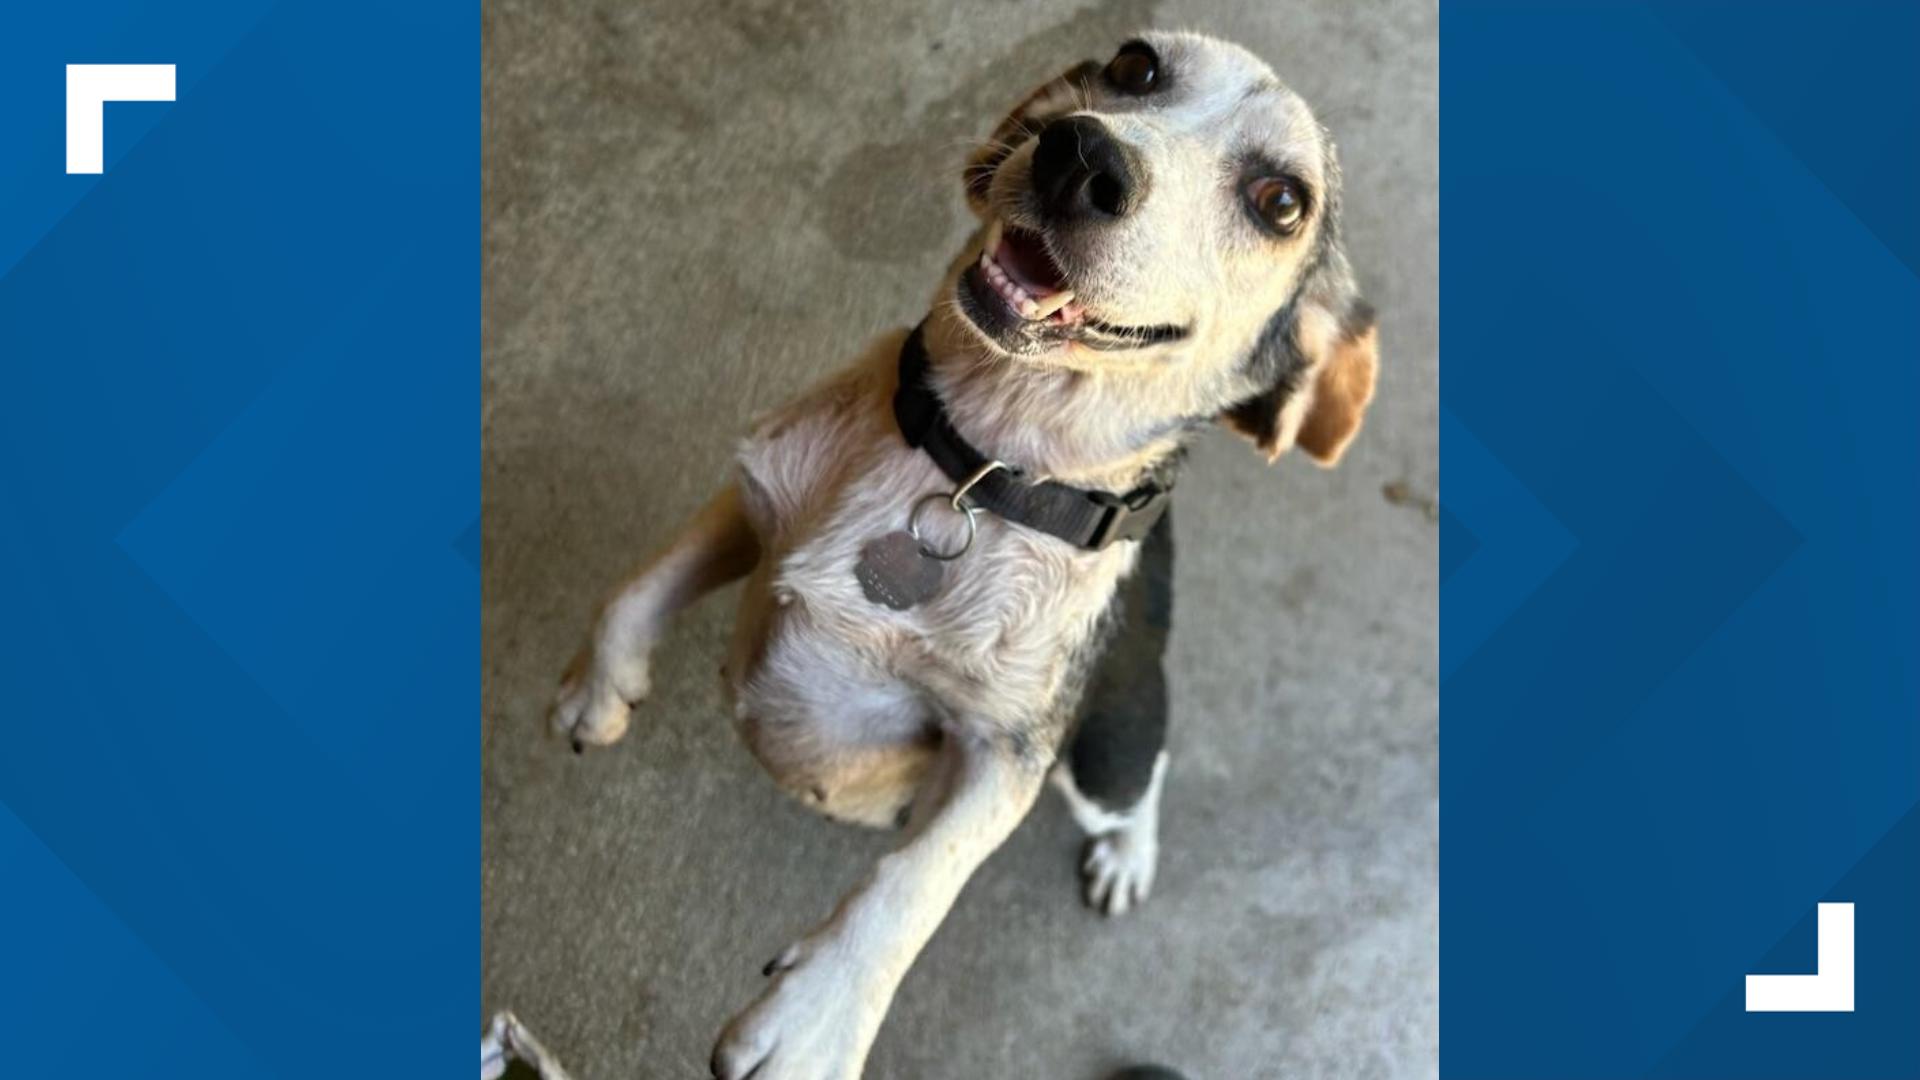 Bridget is a 7-year-old beagle mix who loves to zoom outside in the yard. She's available for adoption at Animal Rescue Inc.